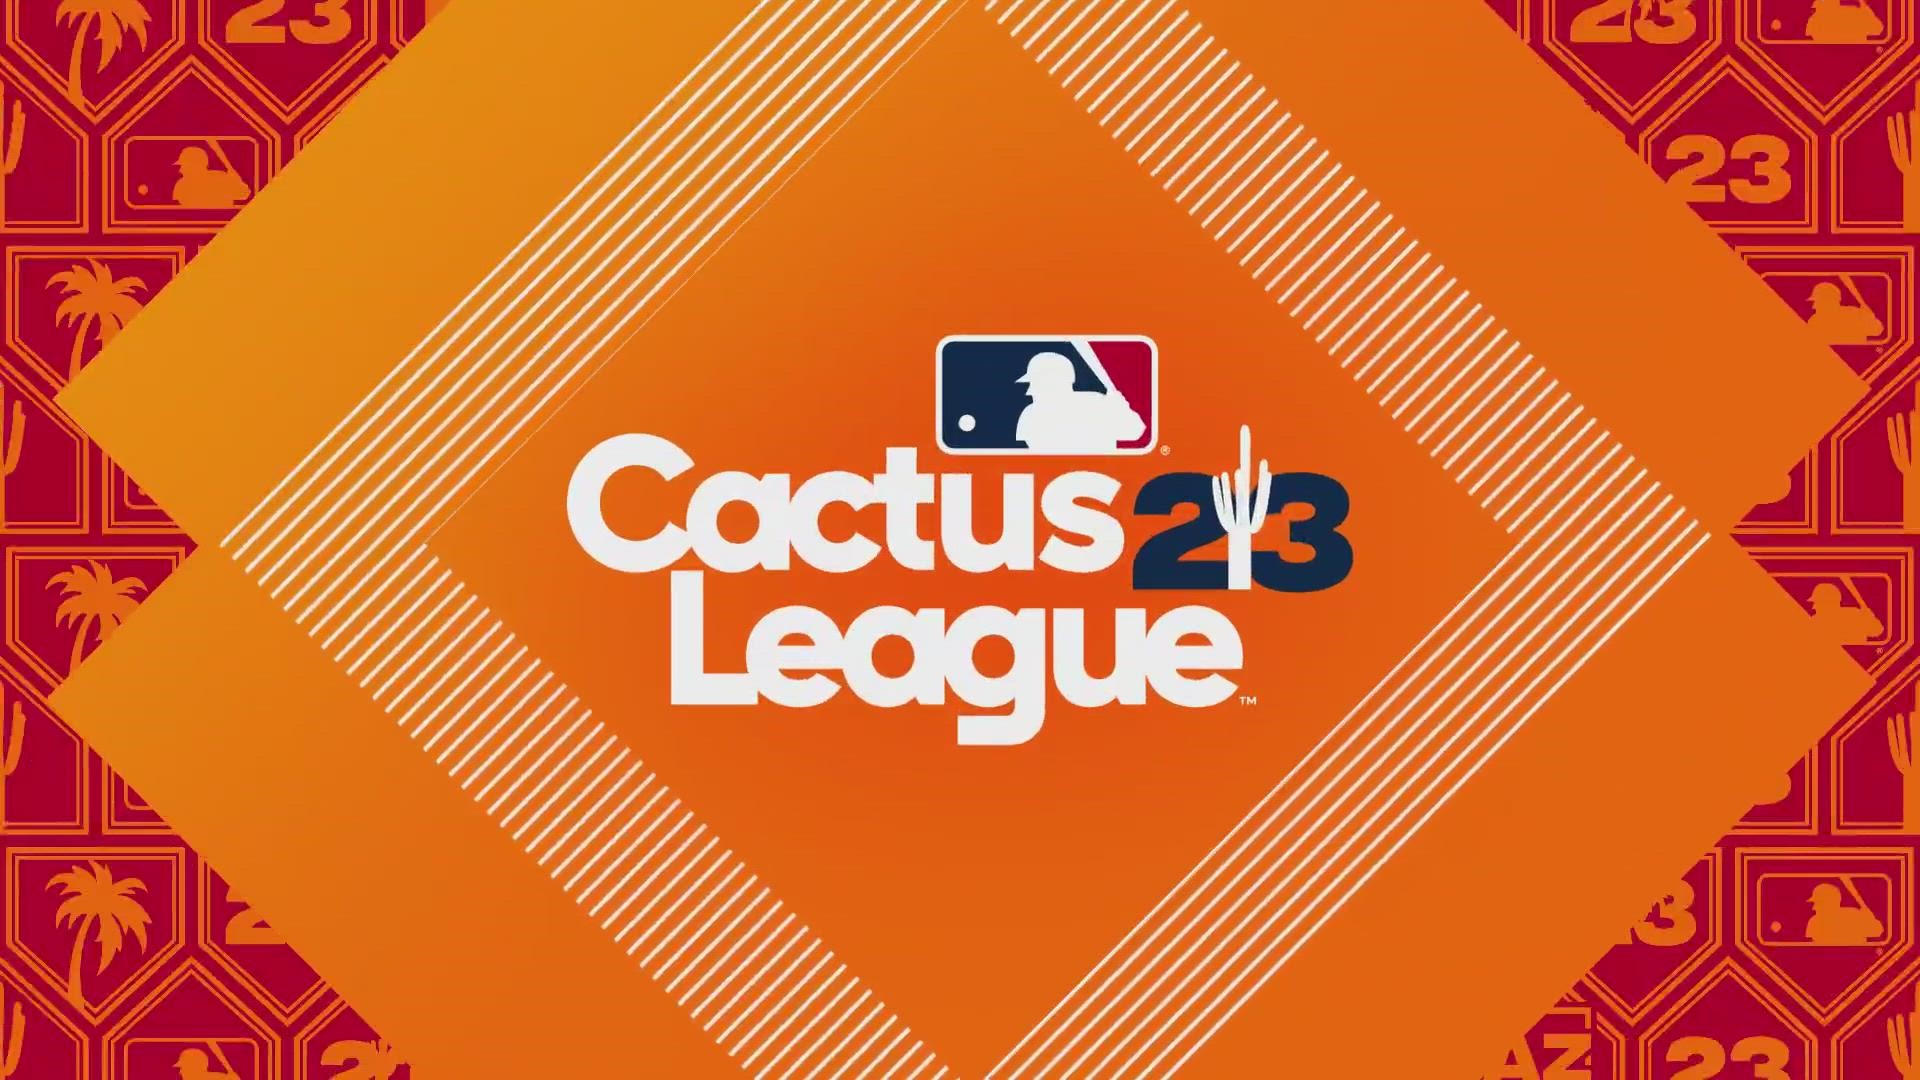 MLB Spring Training is back in the Valley! The 2023 Cactus League returns to action Friday.